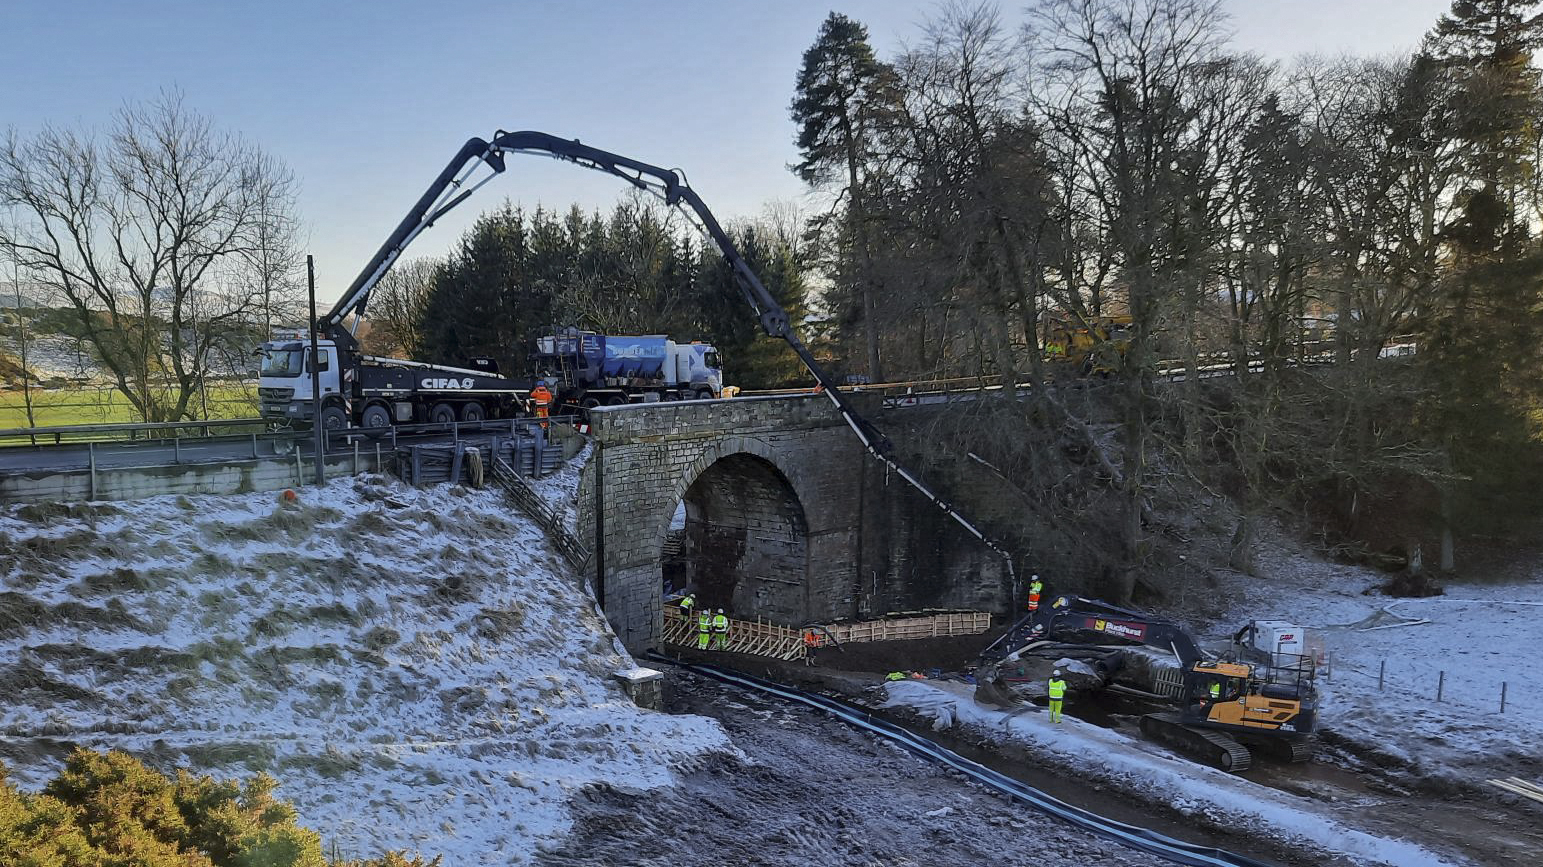 REMOVAL OF TEMPORARY WEIGHT LIMIT FOR A702 WESTWATER BRIDGE